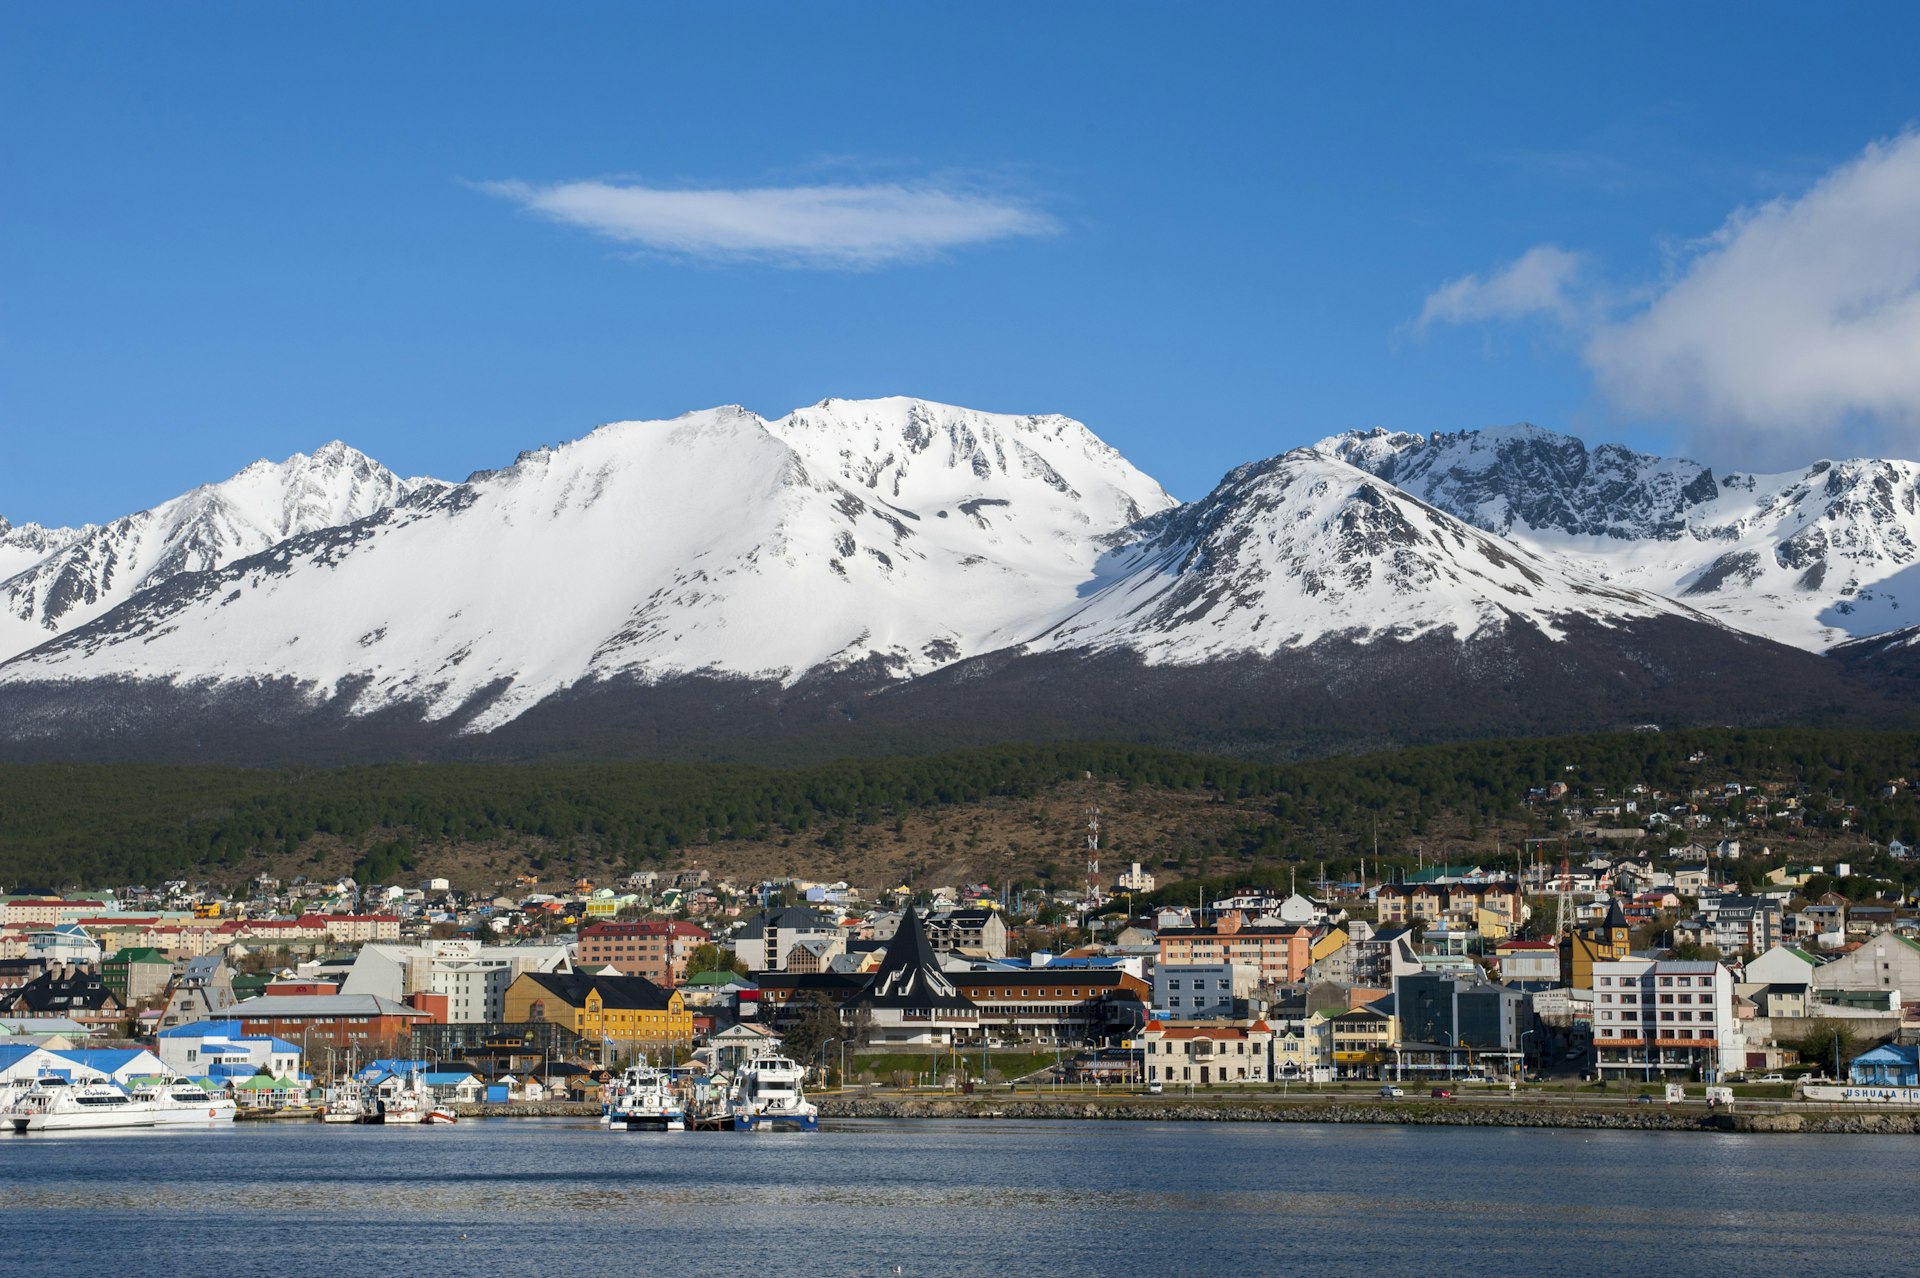 View of Ushuaia, the capital of Tierra del Fuego, Argentina